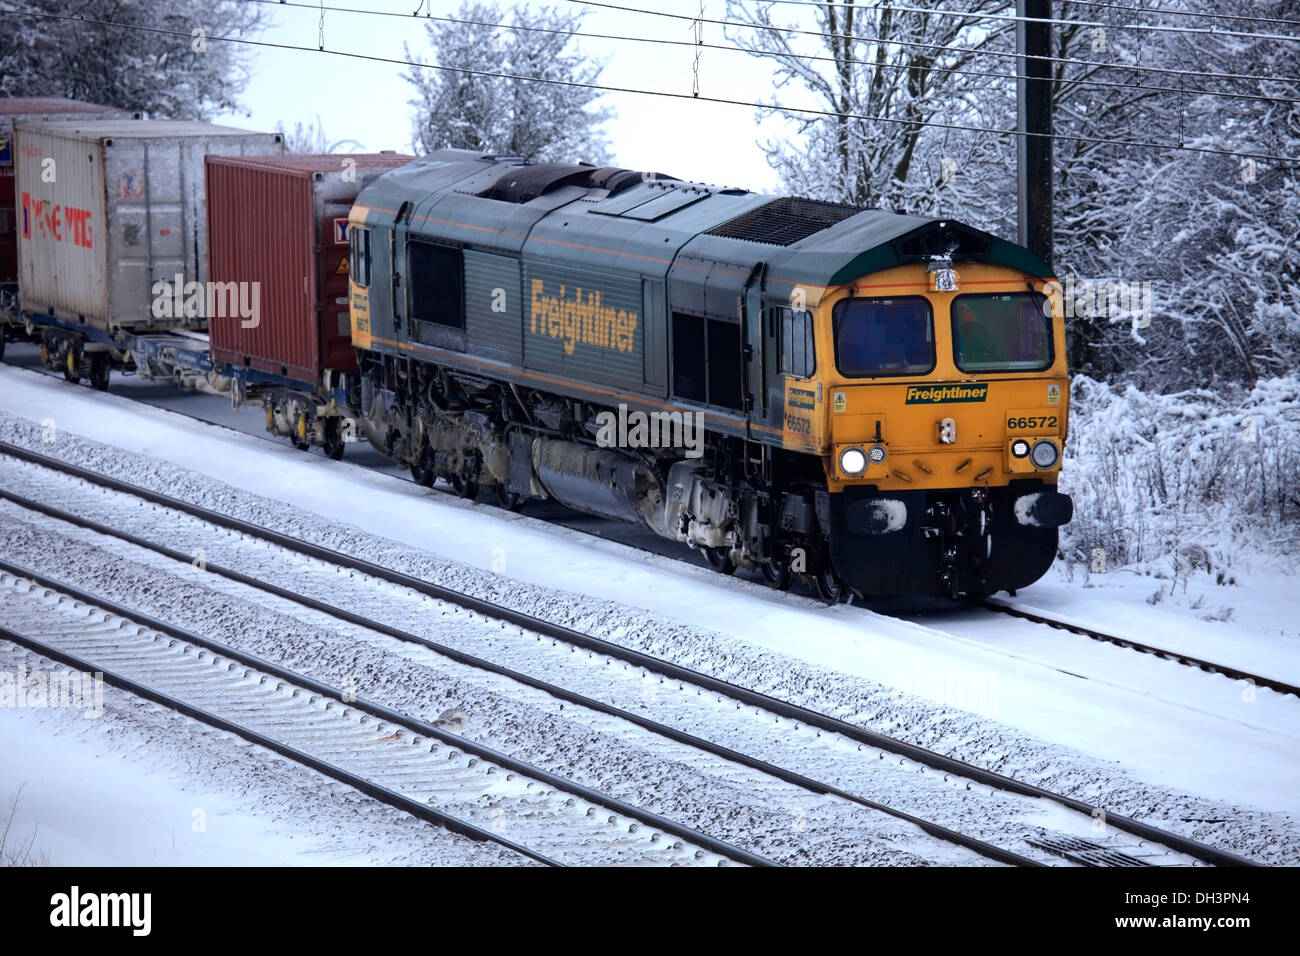 Freightliner trains operating company, 66572 Diesel Powered Freight Train, pulling containers East Coast Main Line, Peterborough Stock Photo